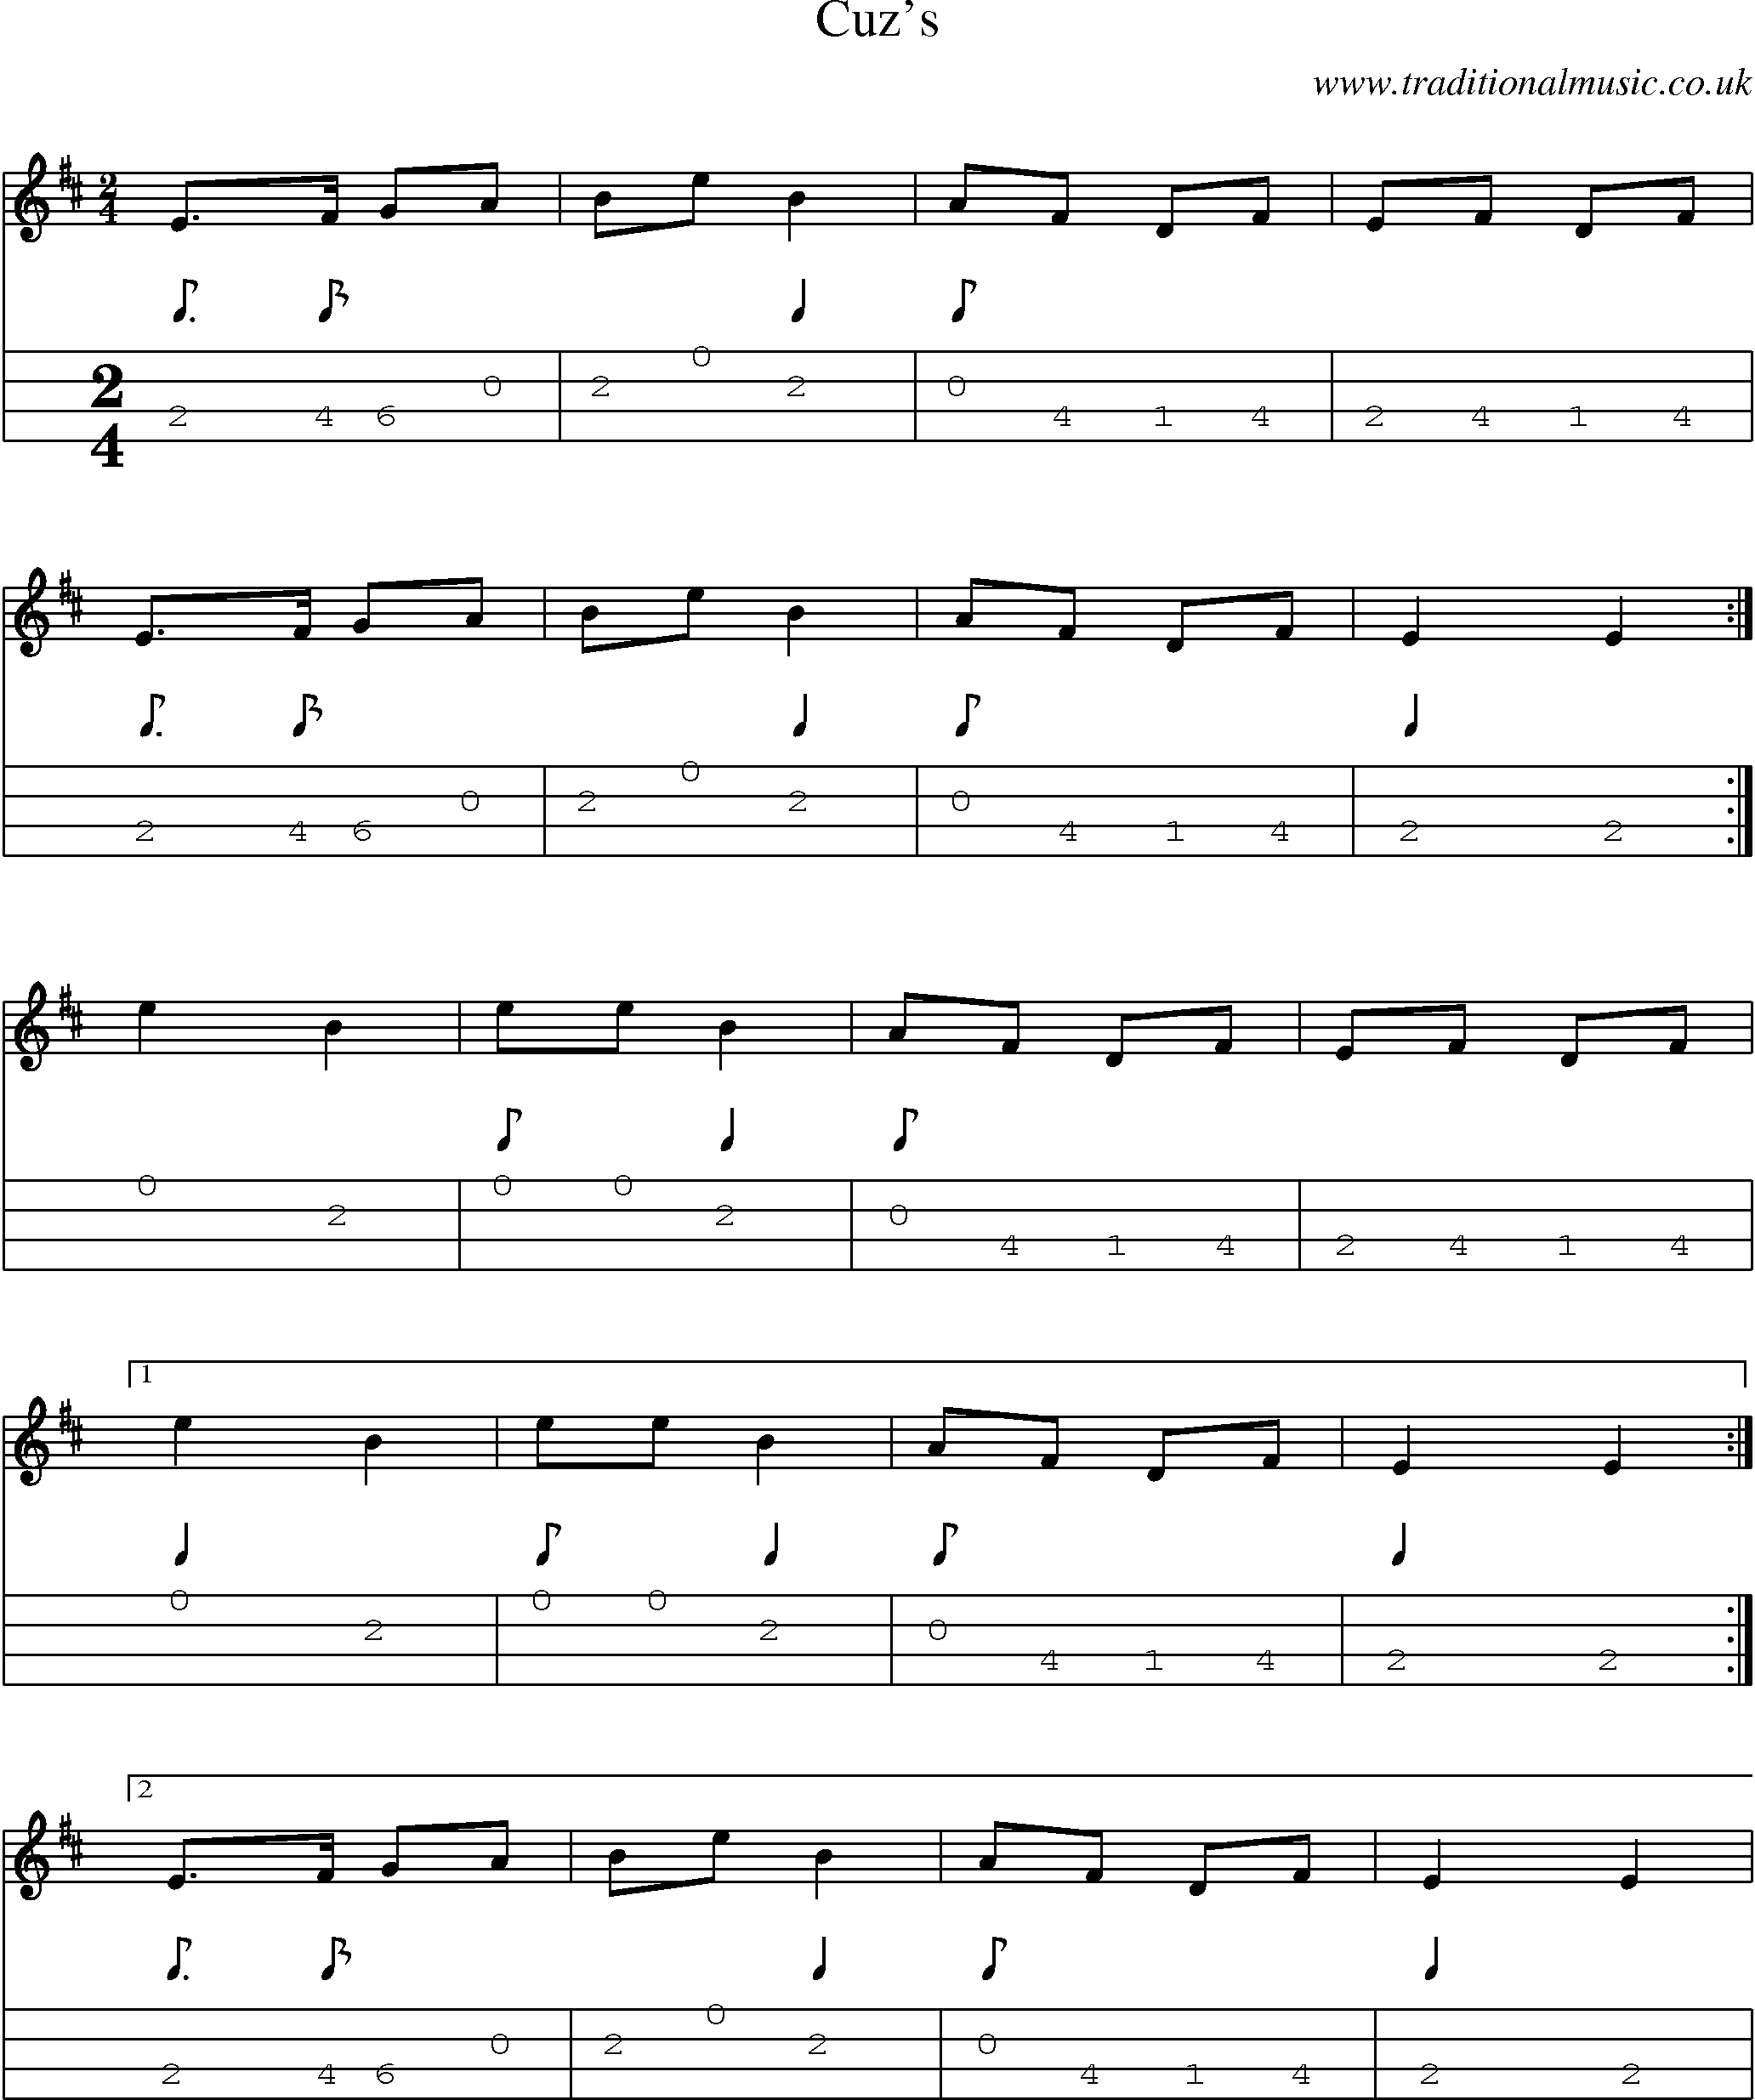 Music Score and Mandolin Tabs for Cuzs